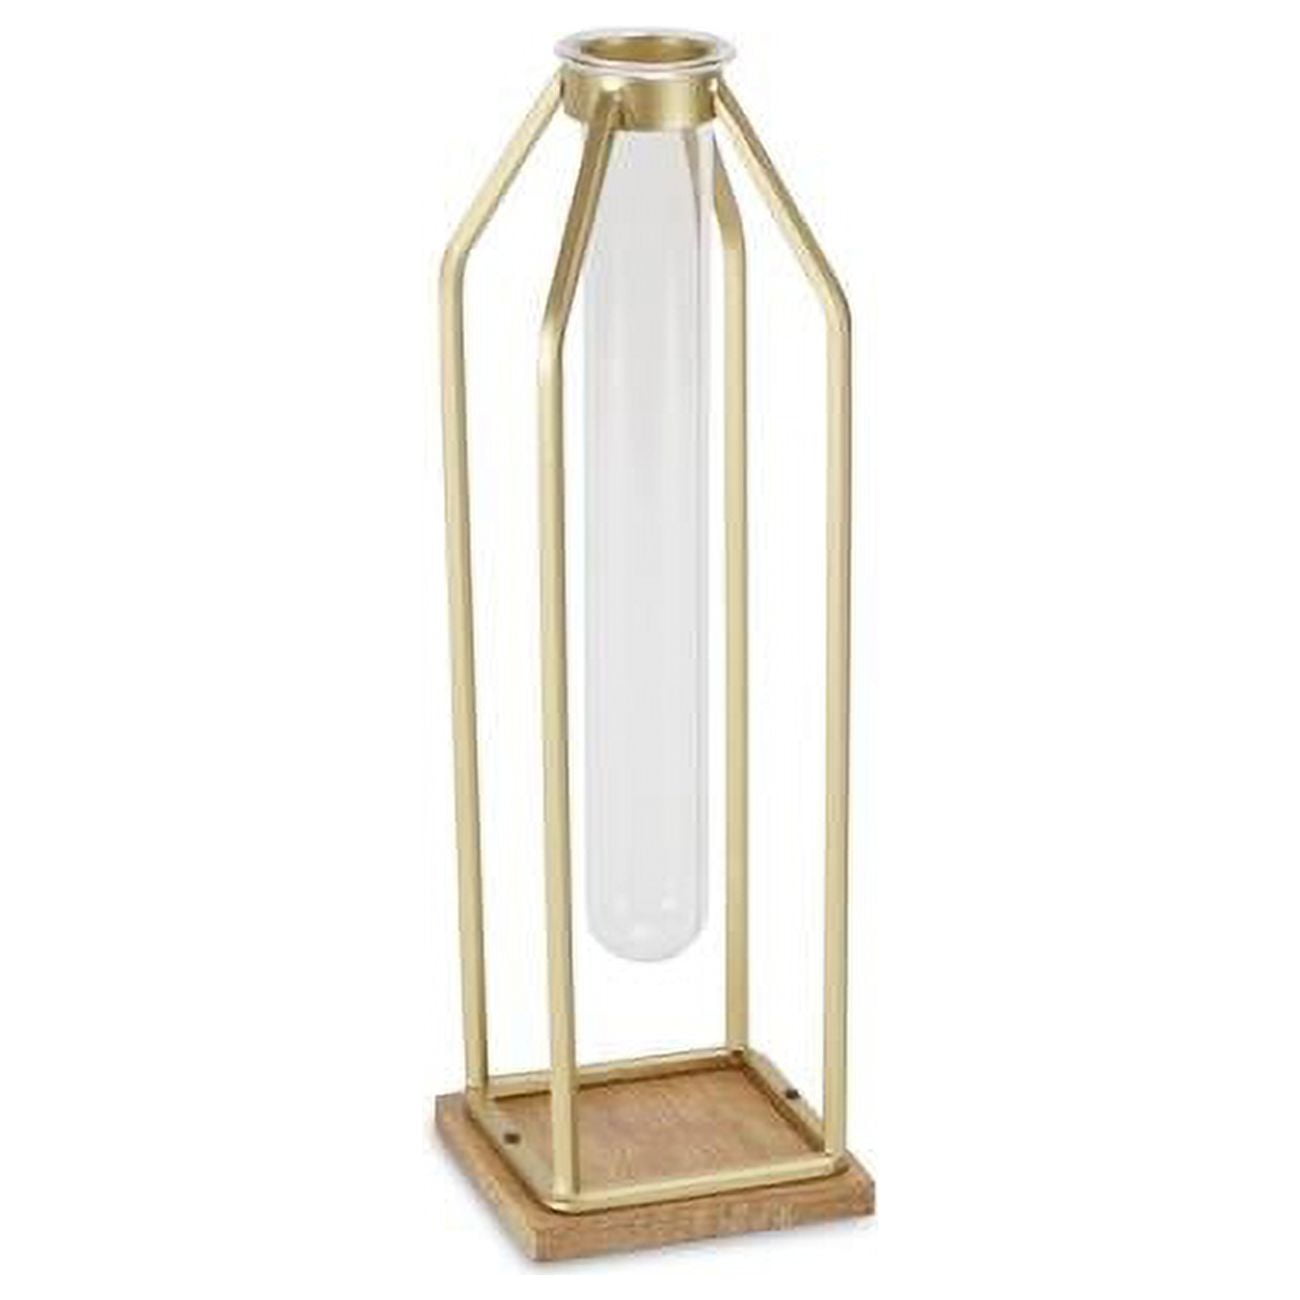 5483l-gd Tall Metal Stand With Glass Tube, Gold